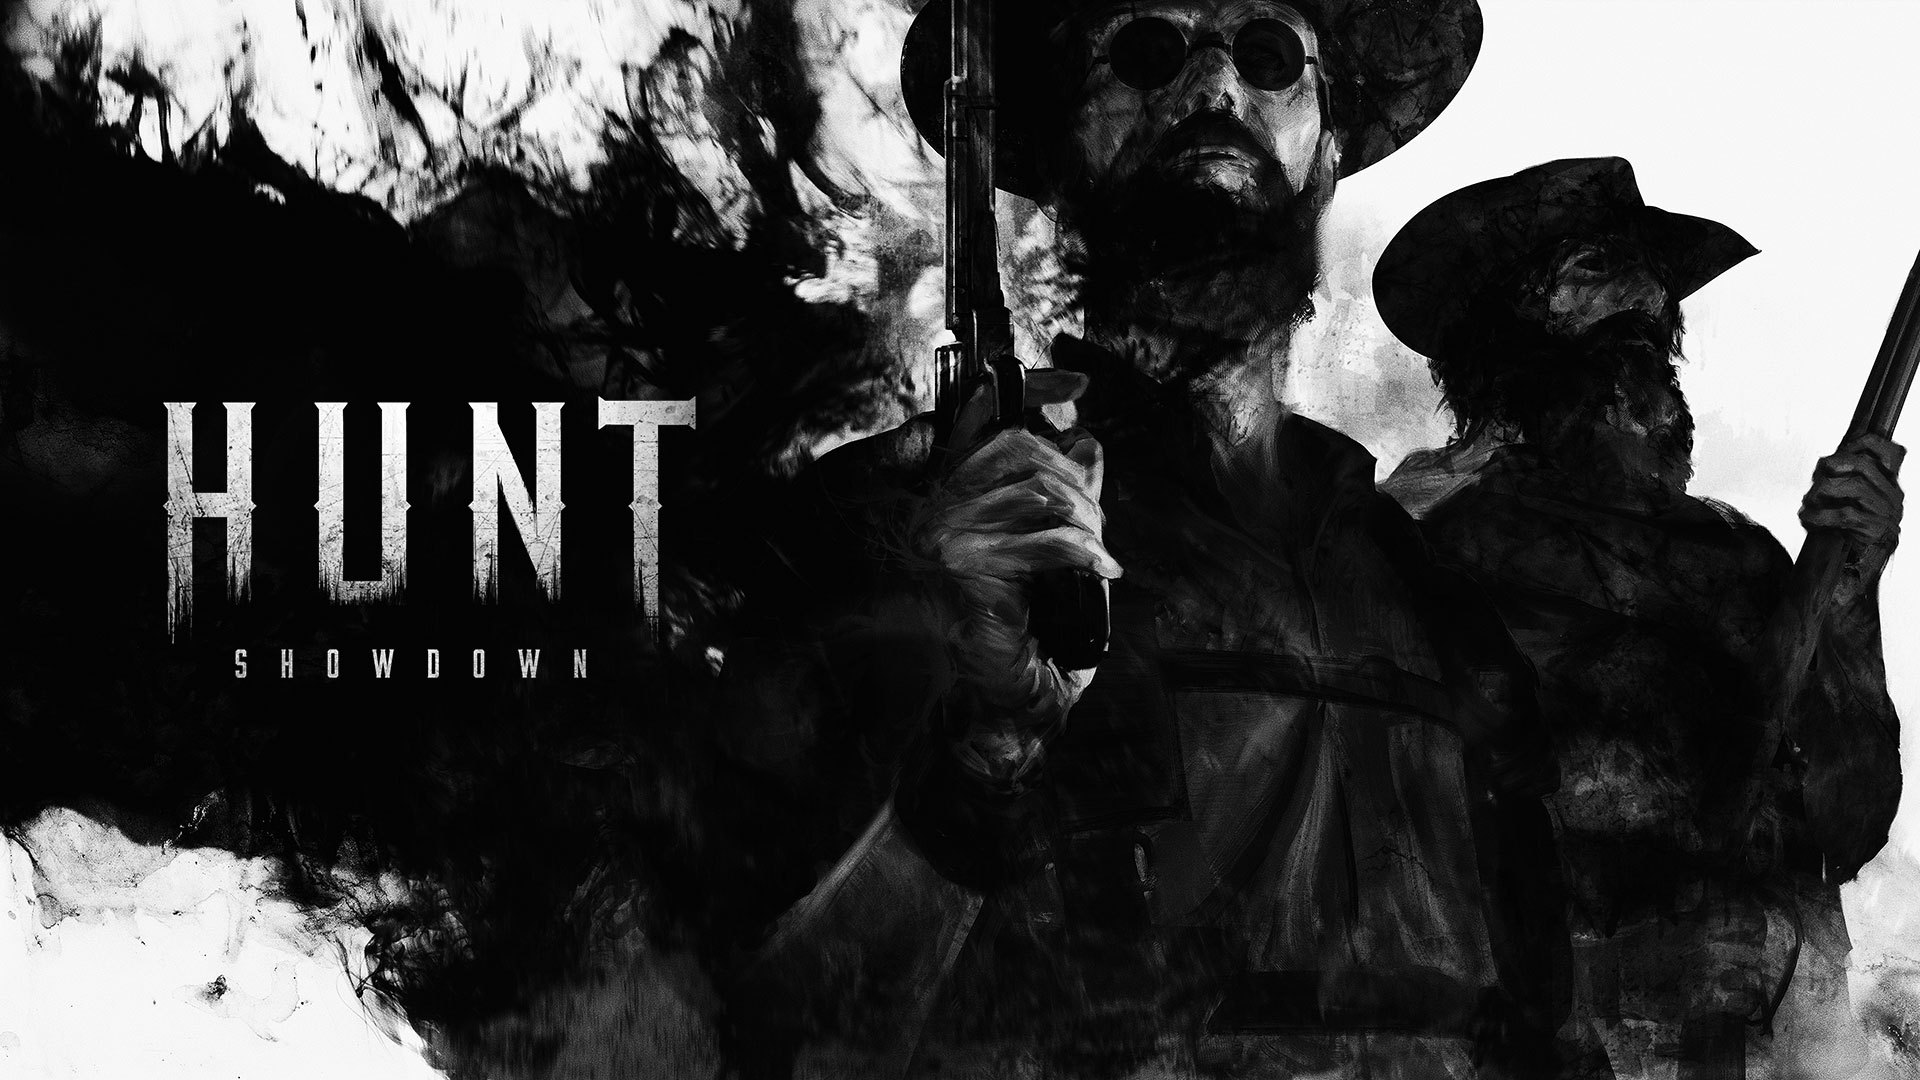 hunt showdown is available now on xbox one